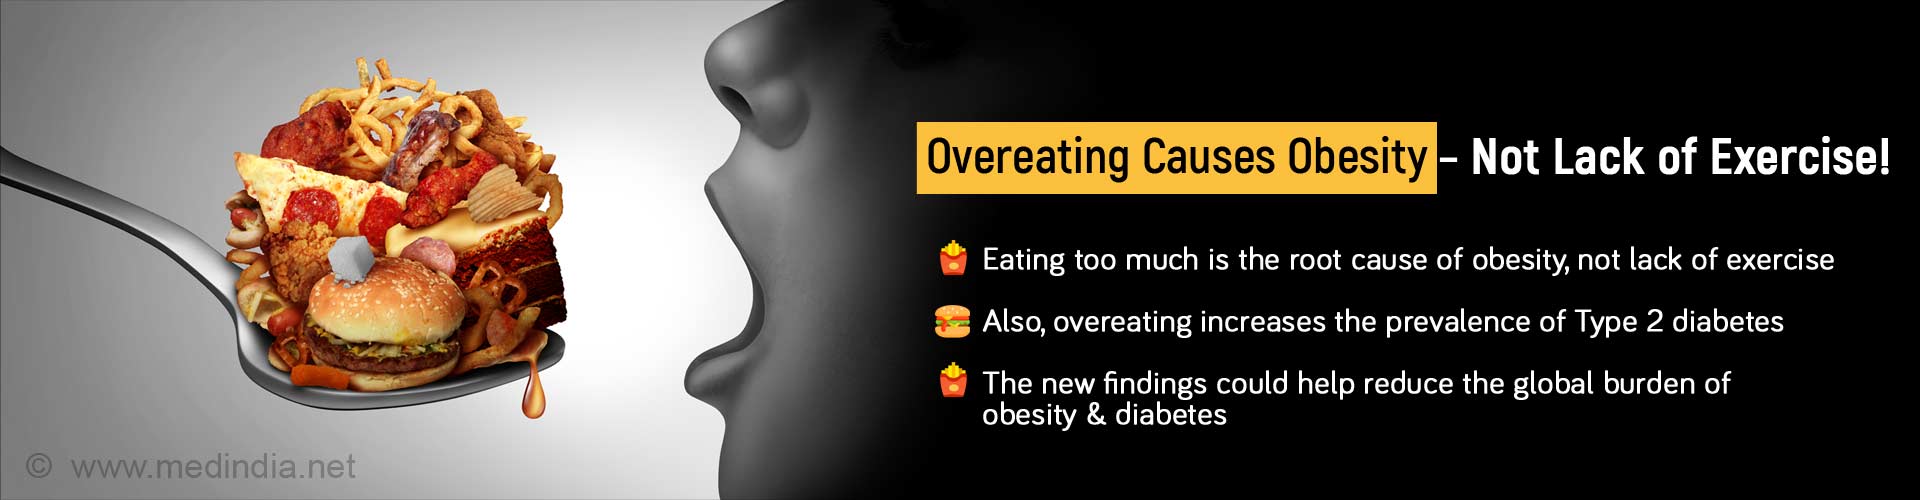 Overeating Causes Obesity, Not Lack of Exercise. Eating too much is the root cause of obesity, not lack of exercise. Also, overeating increases the prevalence of Type 2 diabetes. The new findings could help reduce the global burden of obesity and diabetes. 